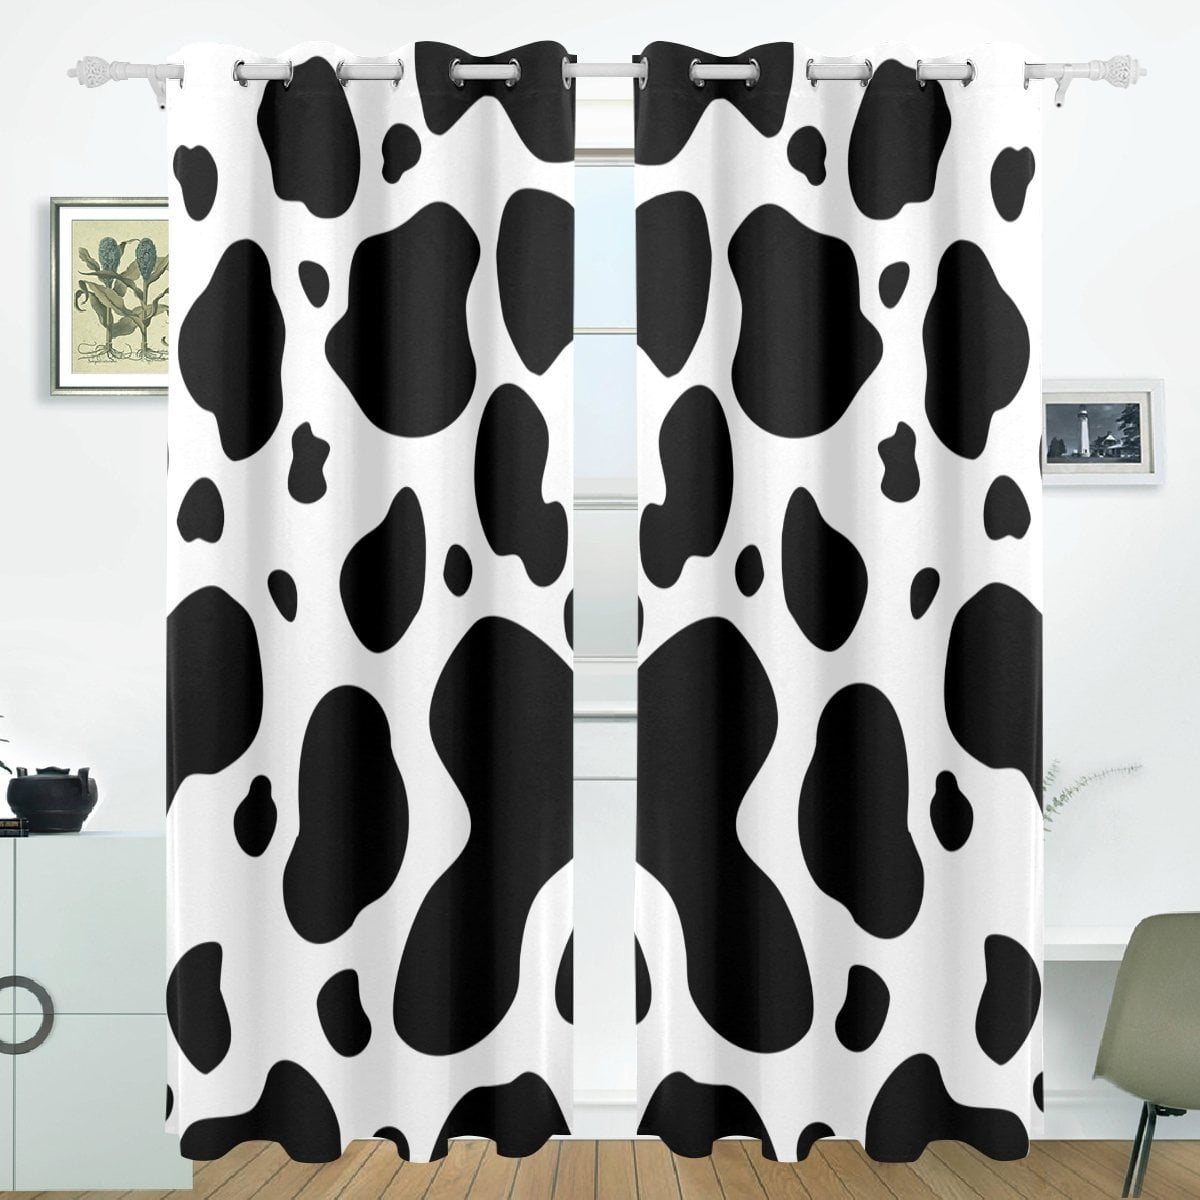 POPCreation Black And White Cow Pattern Window Curtain Blackout Curtains Darkening Thermal Blind